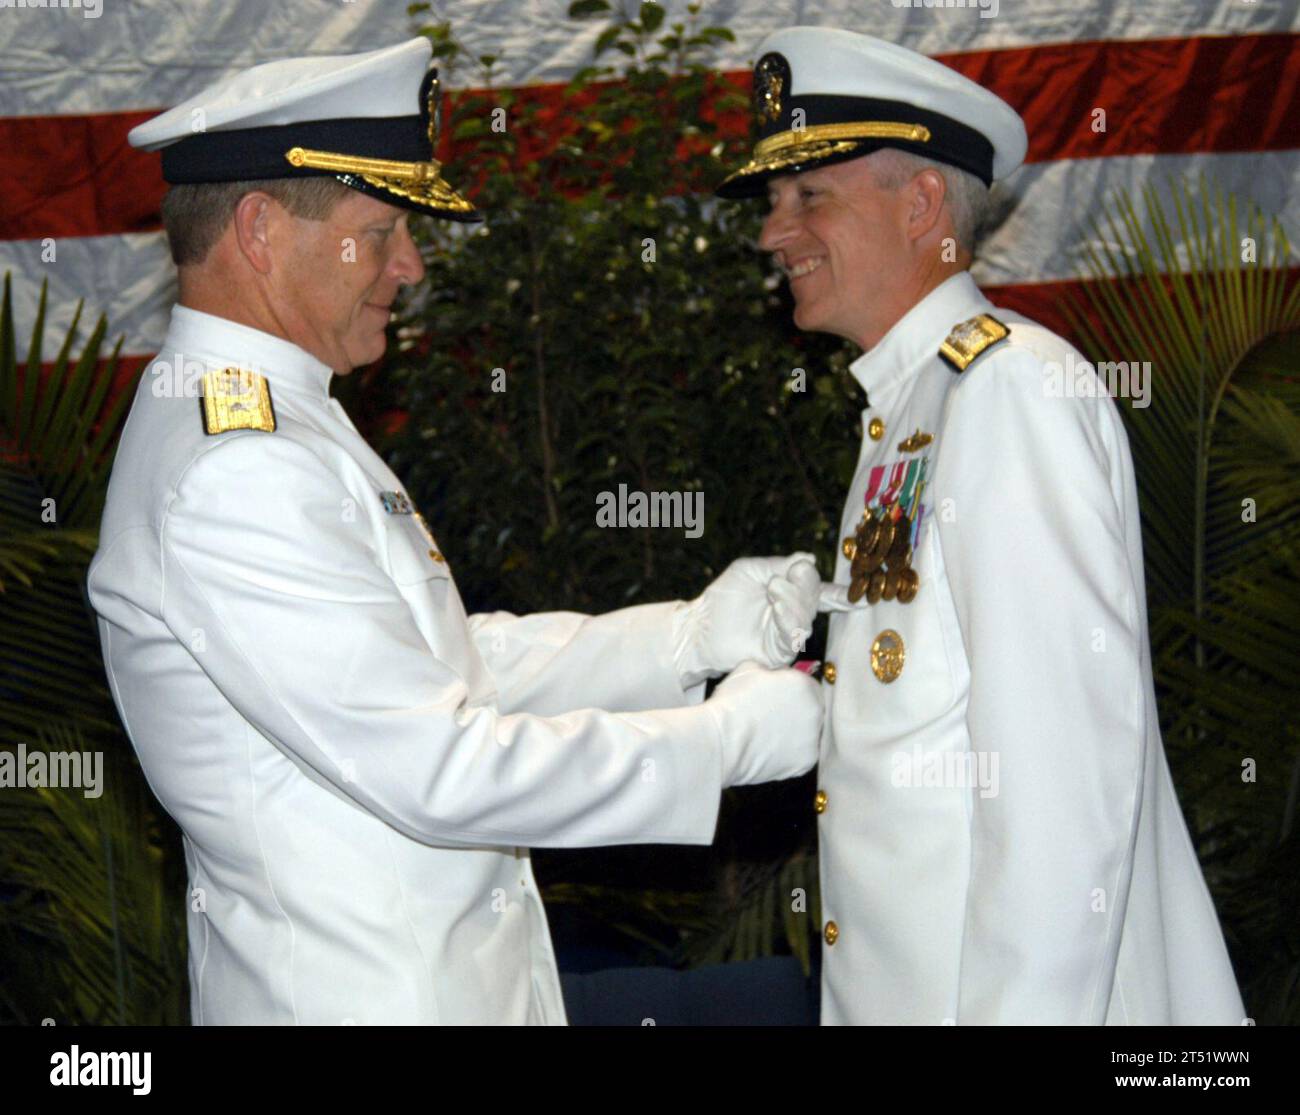 0911137032L-001 STENNIS SPACE CENTER, Miss. (Nov. 13, 2009) Rear Adm. Jonathan W. White, left, commander of the Naval Meteorology and Oceanography Command (NMOC), pins a Legion of Merit Medal on Rear Adm. David W. Titley, Oceanographer and Navigator of the Navy, as an end of tour award at the NMOC change of command ceremony. White relieved Titley as Oceanographer and Navigator of the Navy. (U.S. Navy Stock Photo